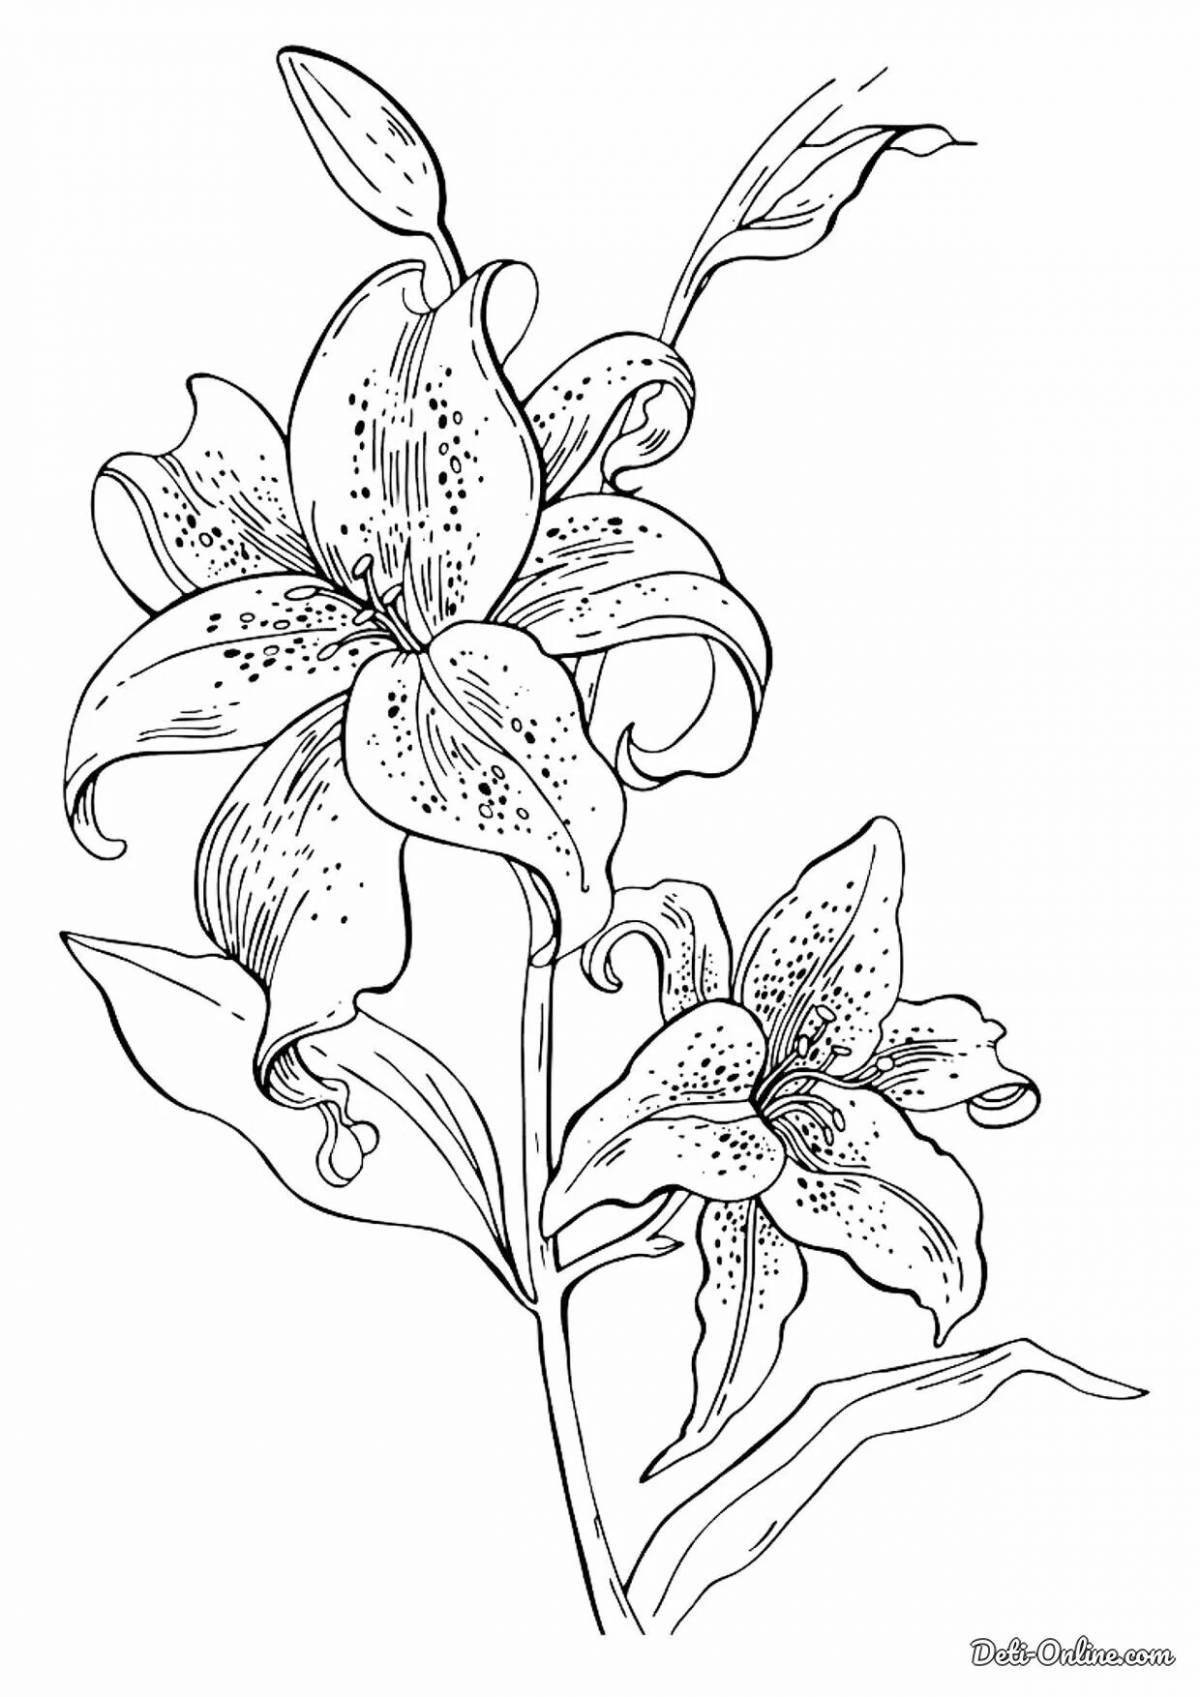 Exquisite lily coloring book